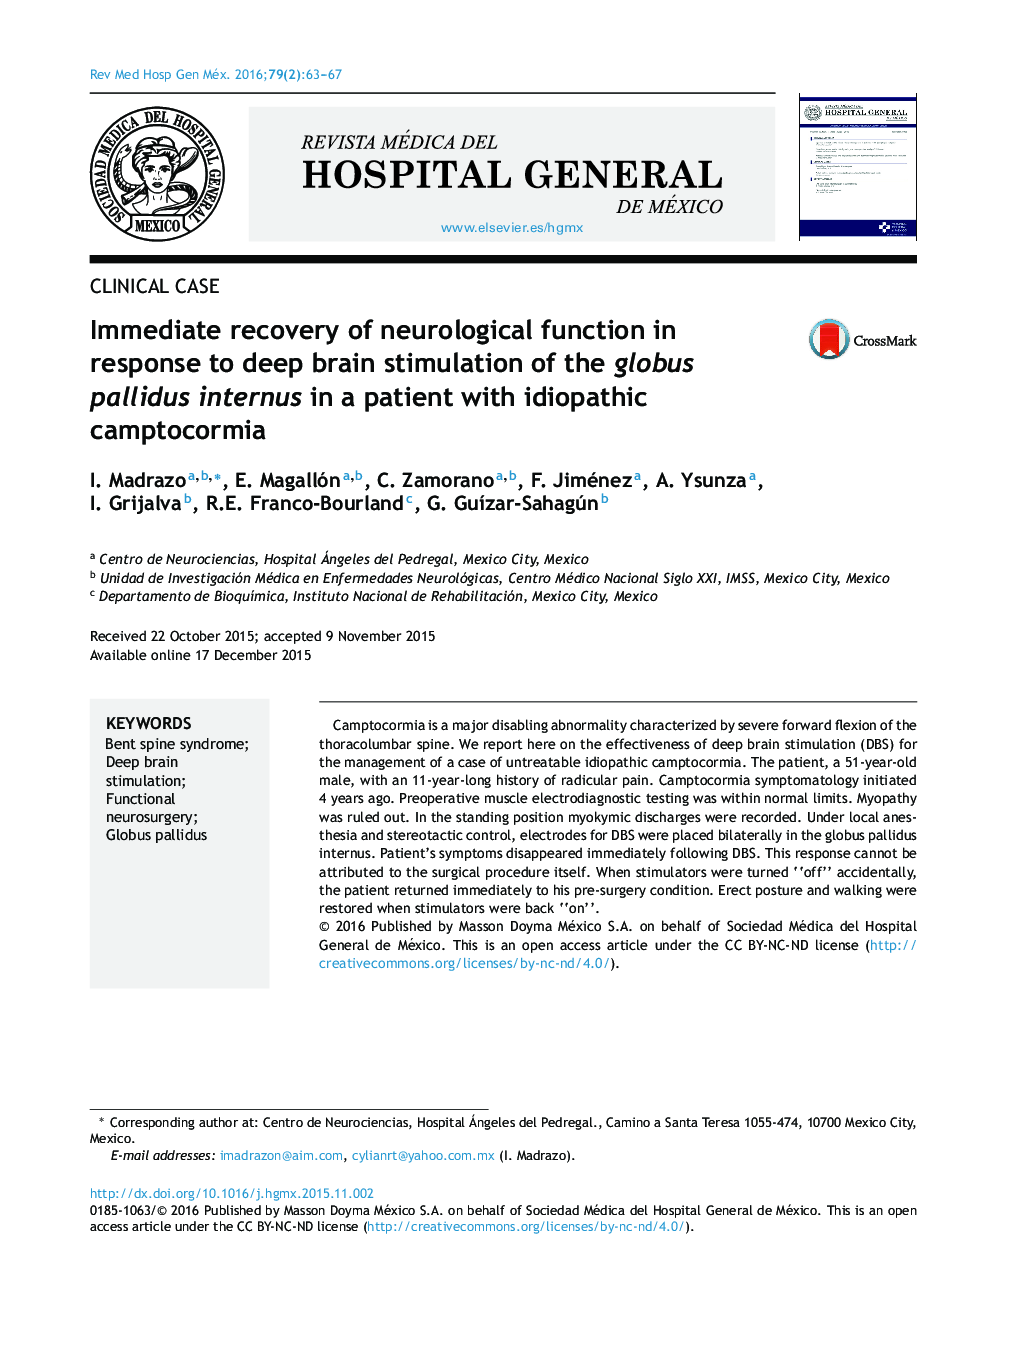 Immediate recovery of neurological function in response to deep brain stimulation of the globus pallidus internus in a patient with idiopathic camptocormia